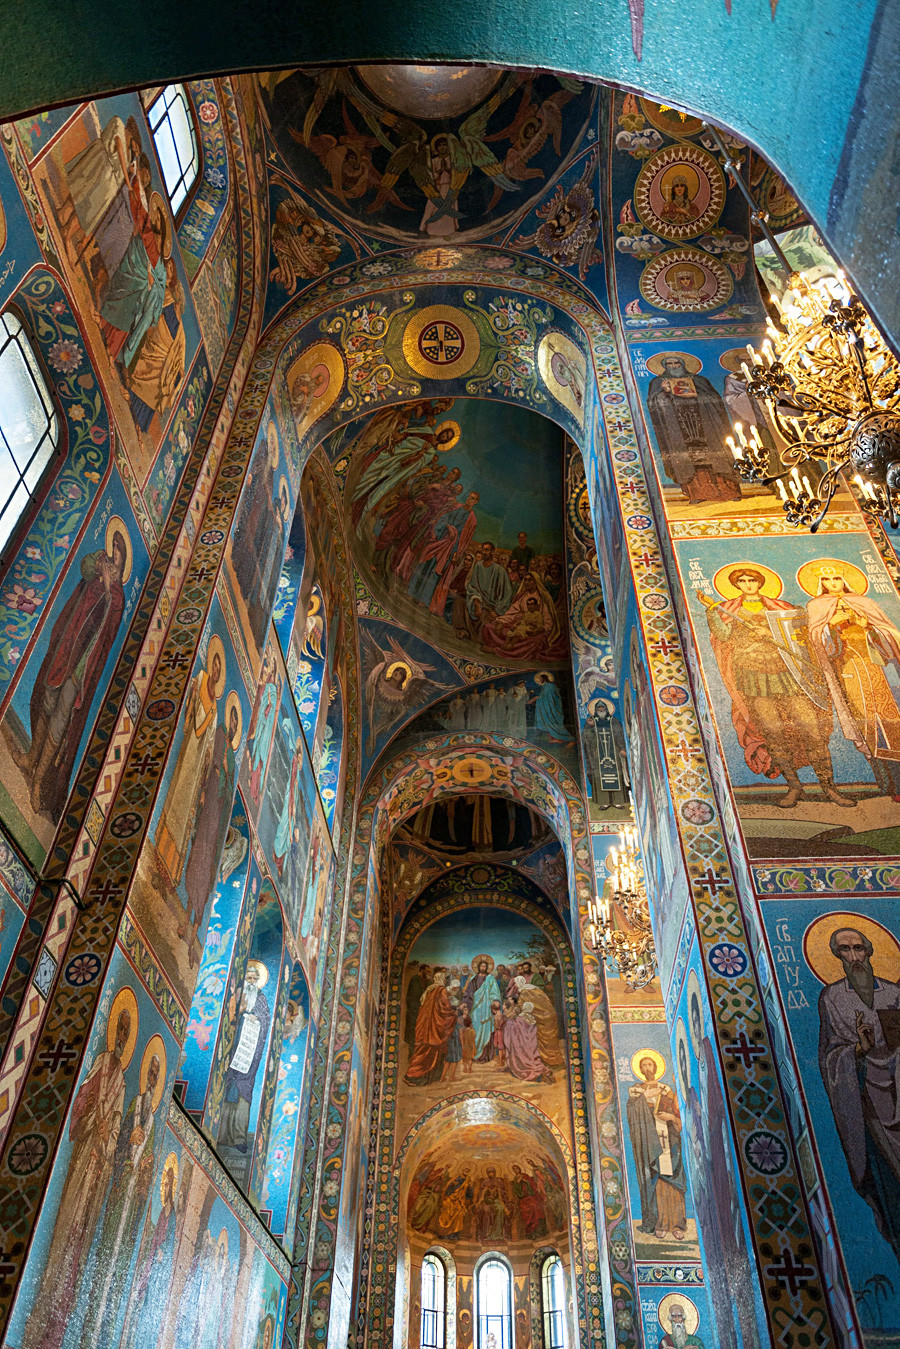 7 Facts About The Church Of The Savior On Spilled Blood In St Petersburg Russia Beyond